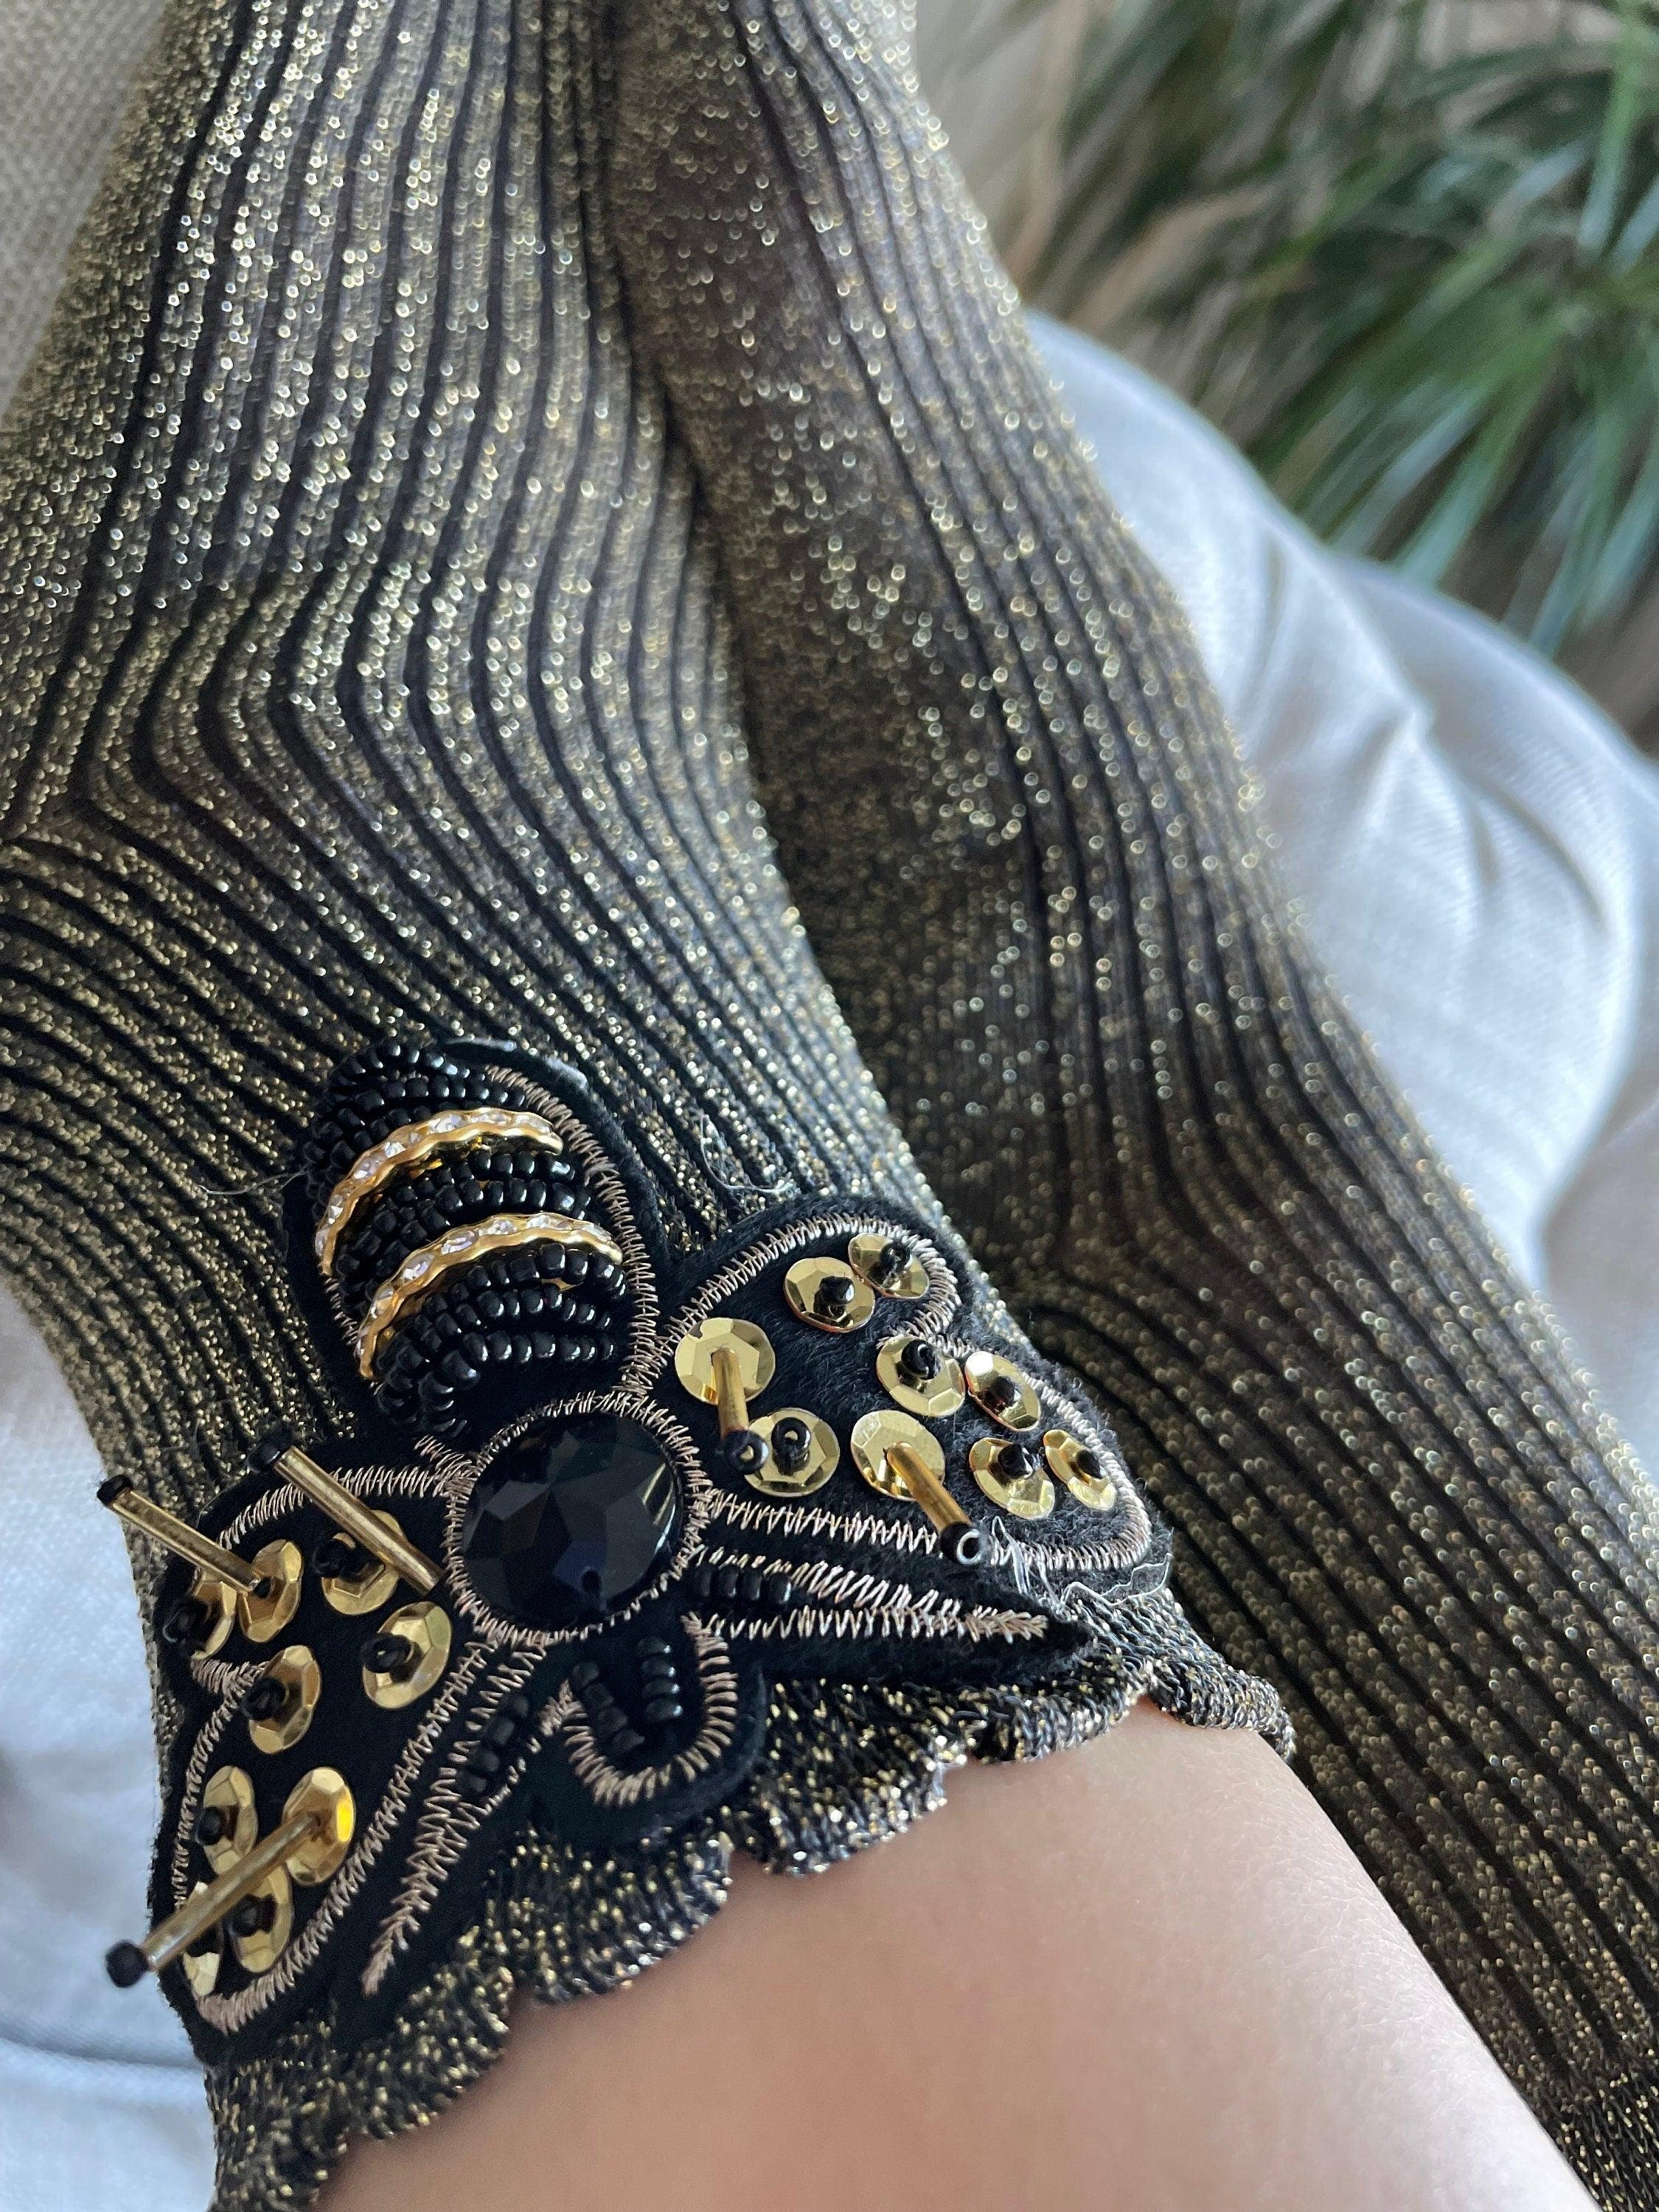 Trendy Big Bee Stone Handmade Cotton Socks - Gold and Black Embellished Mesh Socks with Cute Novelty Stone Detail available at Moyoni Design